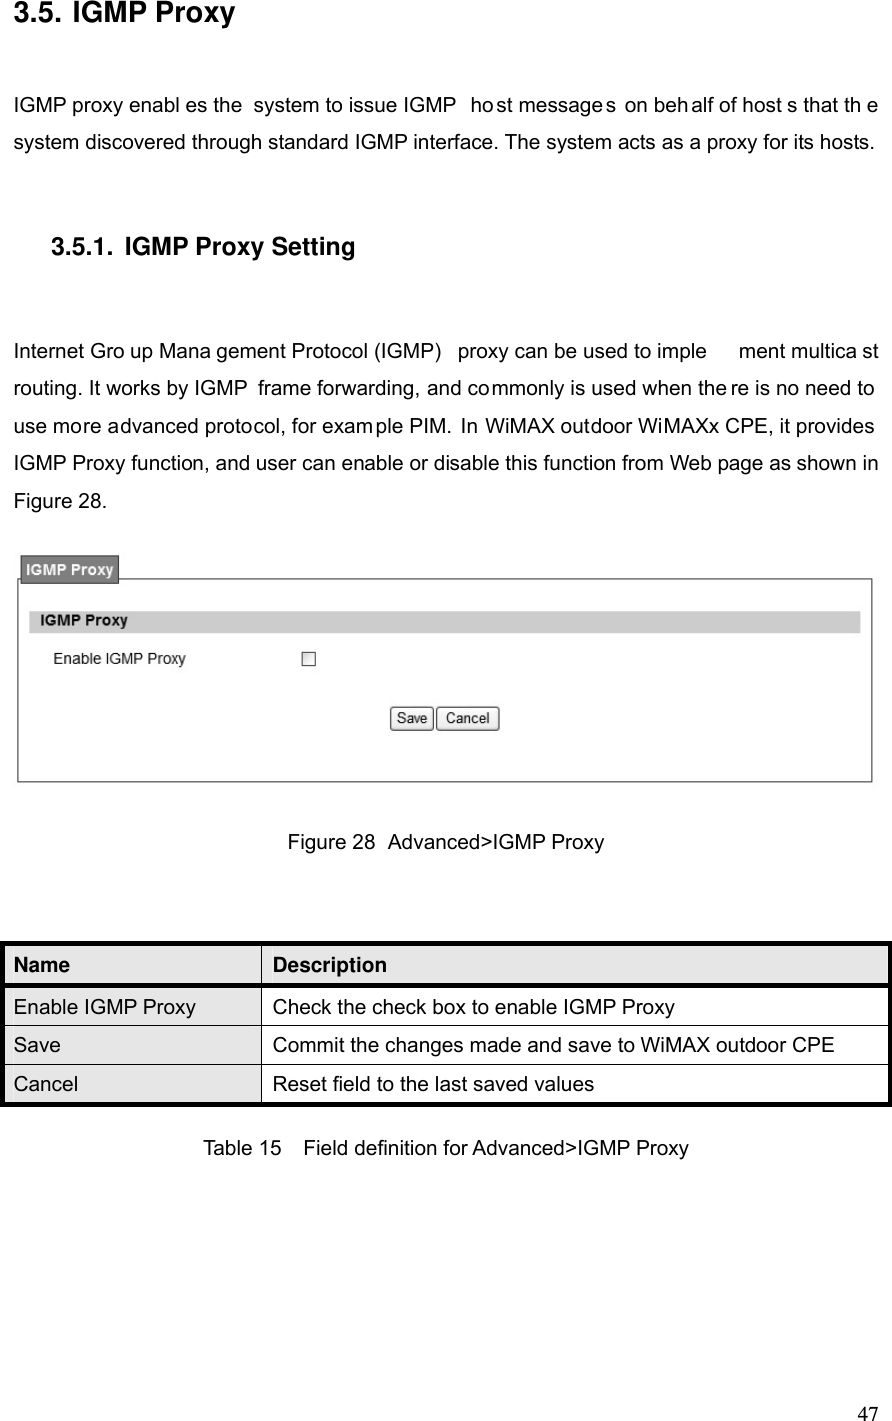  473.5. IGMP Proxy IGMP proxy enabl es the  system to issue IGMP  ho st message s on beh alf of host s that th e system discovered through standard IGMP interface. The system acts as a proxy for its hosts. 3.5.1.  IGMP Proxy Setting Internet Gro up Mana gement Protocol (IGMP)  proxy can be used to imple ment multica st routing. It works by IGMP  frame forwarding, and commonly is used when the re is no need to  use more advanced protocol, for exam ple PIM. In WiMAX outdoor WiMAXx CPE, it provides IGMP Proxy function, and user can enable or disable this function from Web page as shown in Figure 28.    Figure 28  Advanced&gt;IGMP Proxy  Name  Description Enable IGMP Proxy  Check the check box to enable IGMP Proxy Save  Commit the changes made and save to WiMAX outdoor CPE Cancel  Reset field to the last saved values Table 15  Field definition for Advanced&gt;IGMP Proxy 